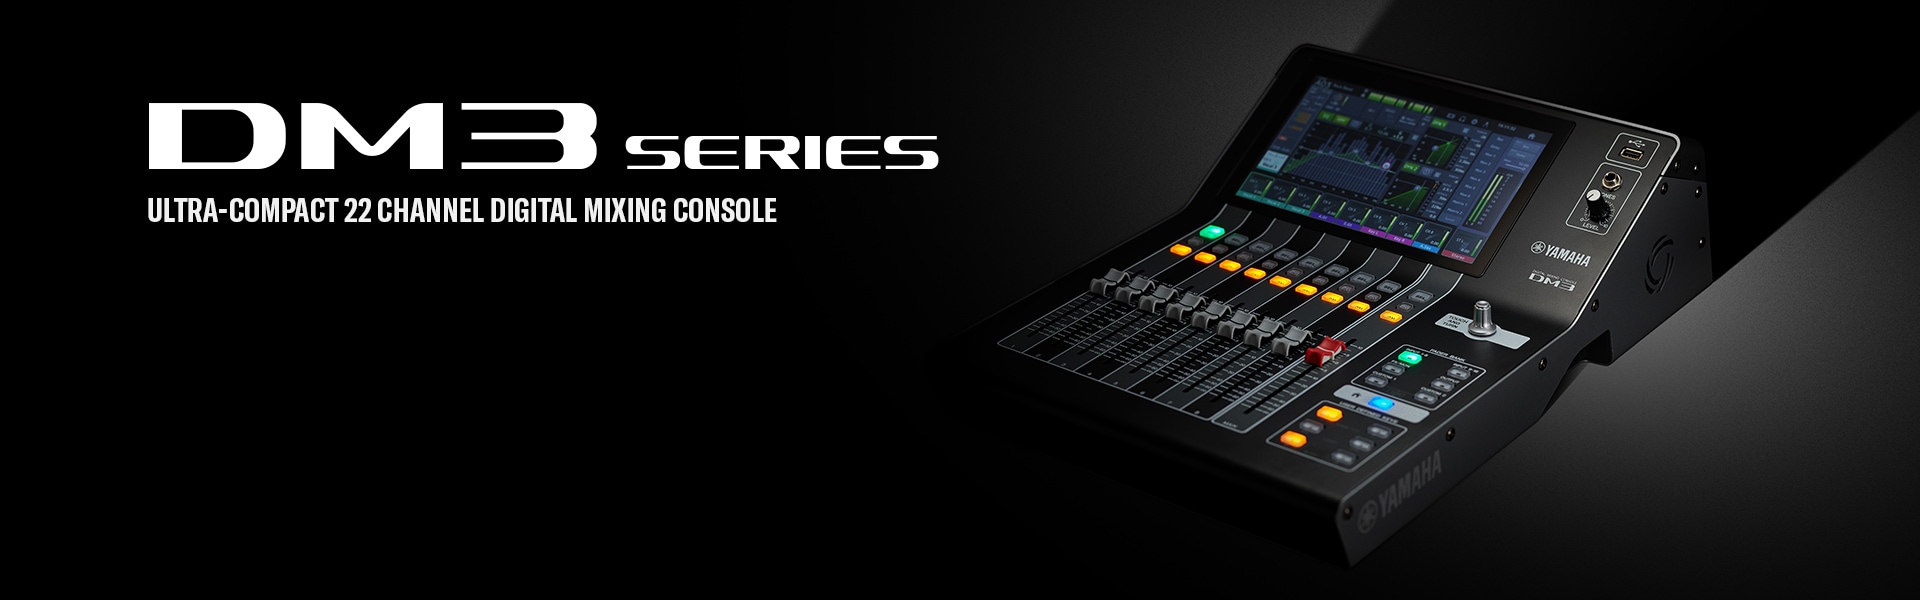 DM3 Series Ultra-Compact 22 Channel Digital Mixing Console